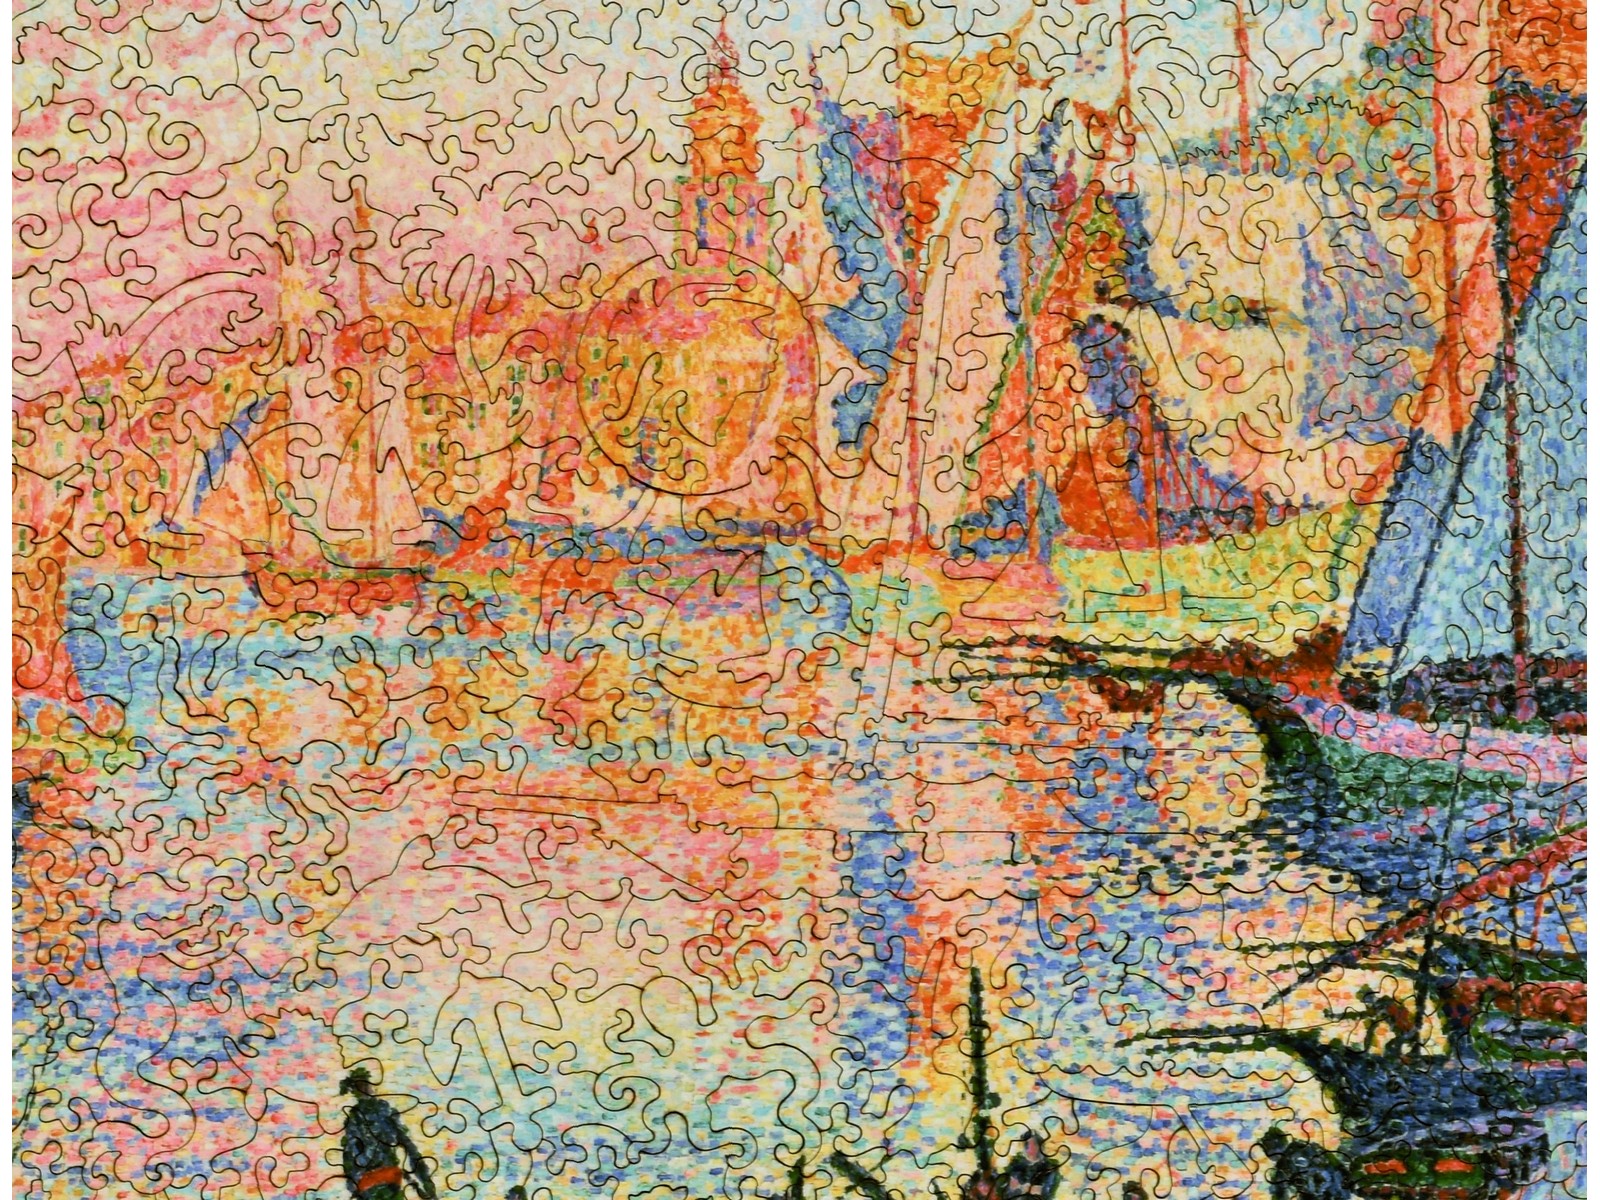 A closeup of the front of the puzzle, The Port of Saint-Tropez, showing the detail in the pieces.